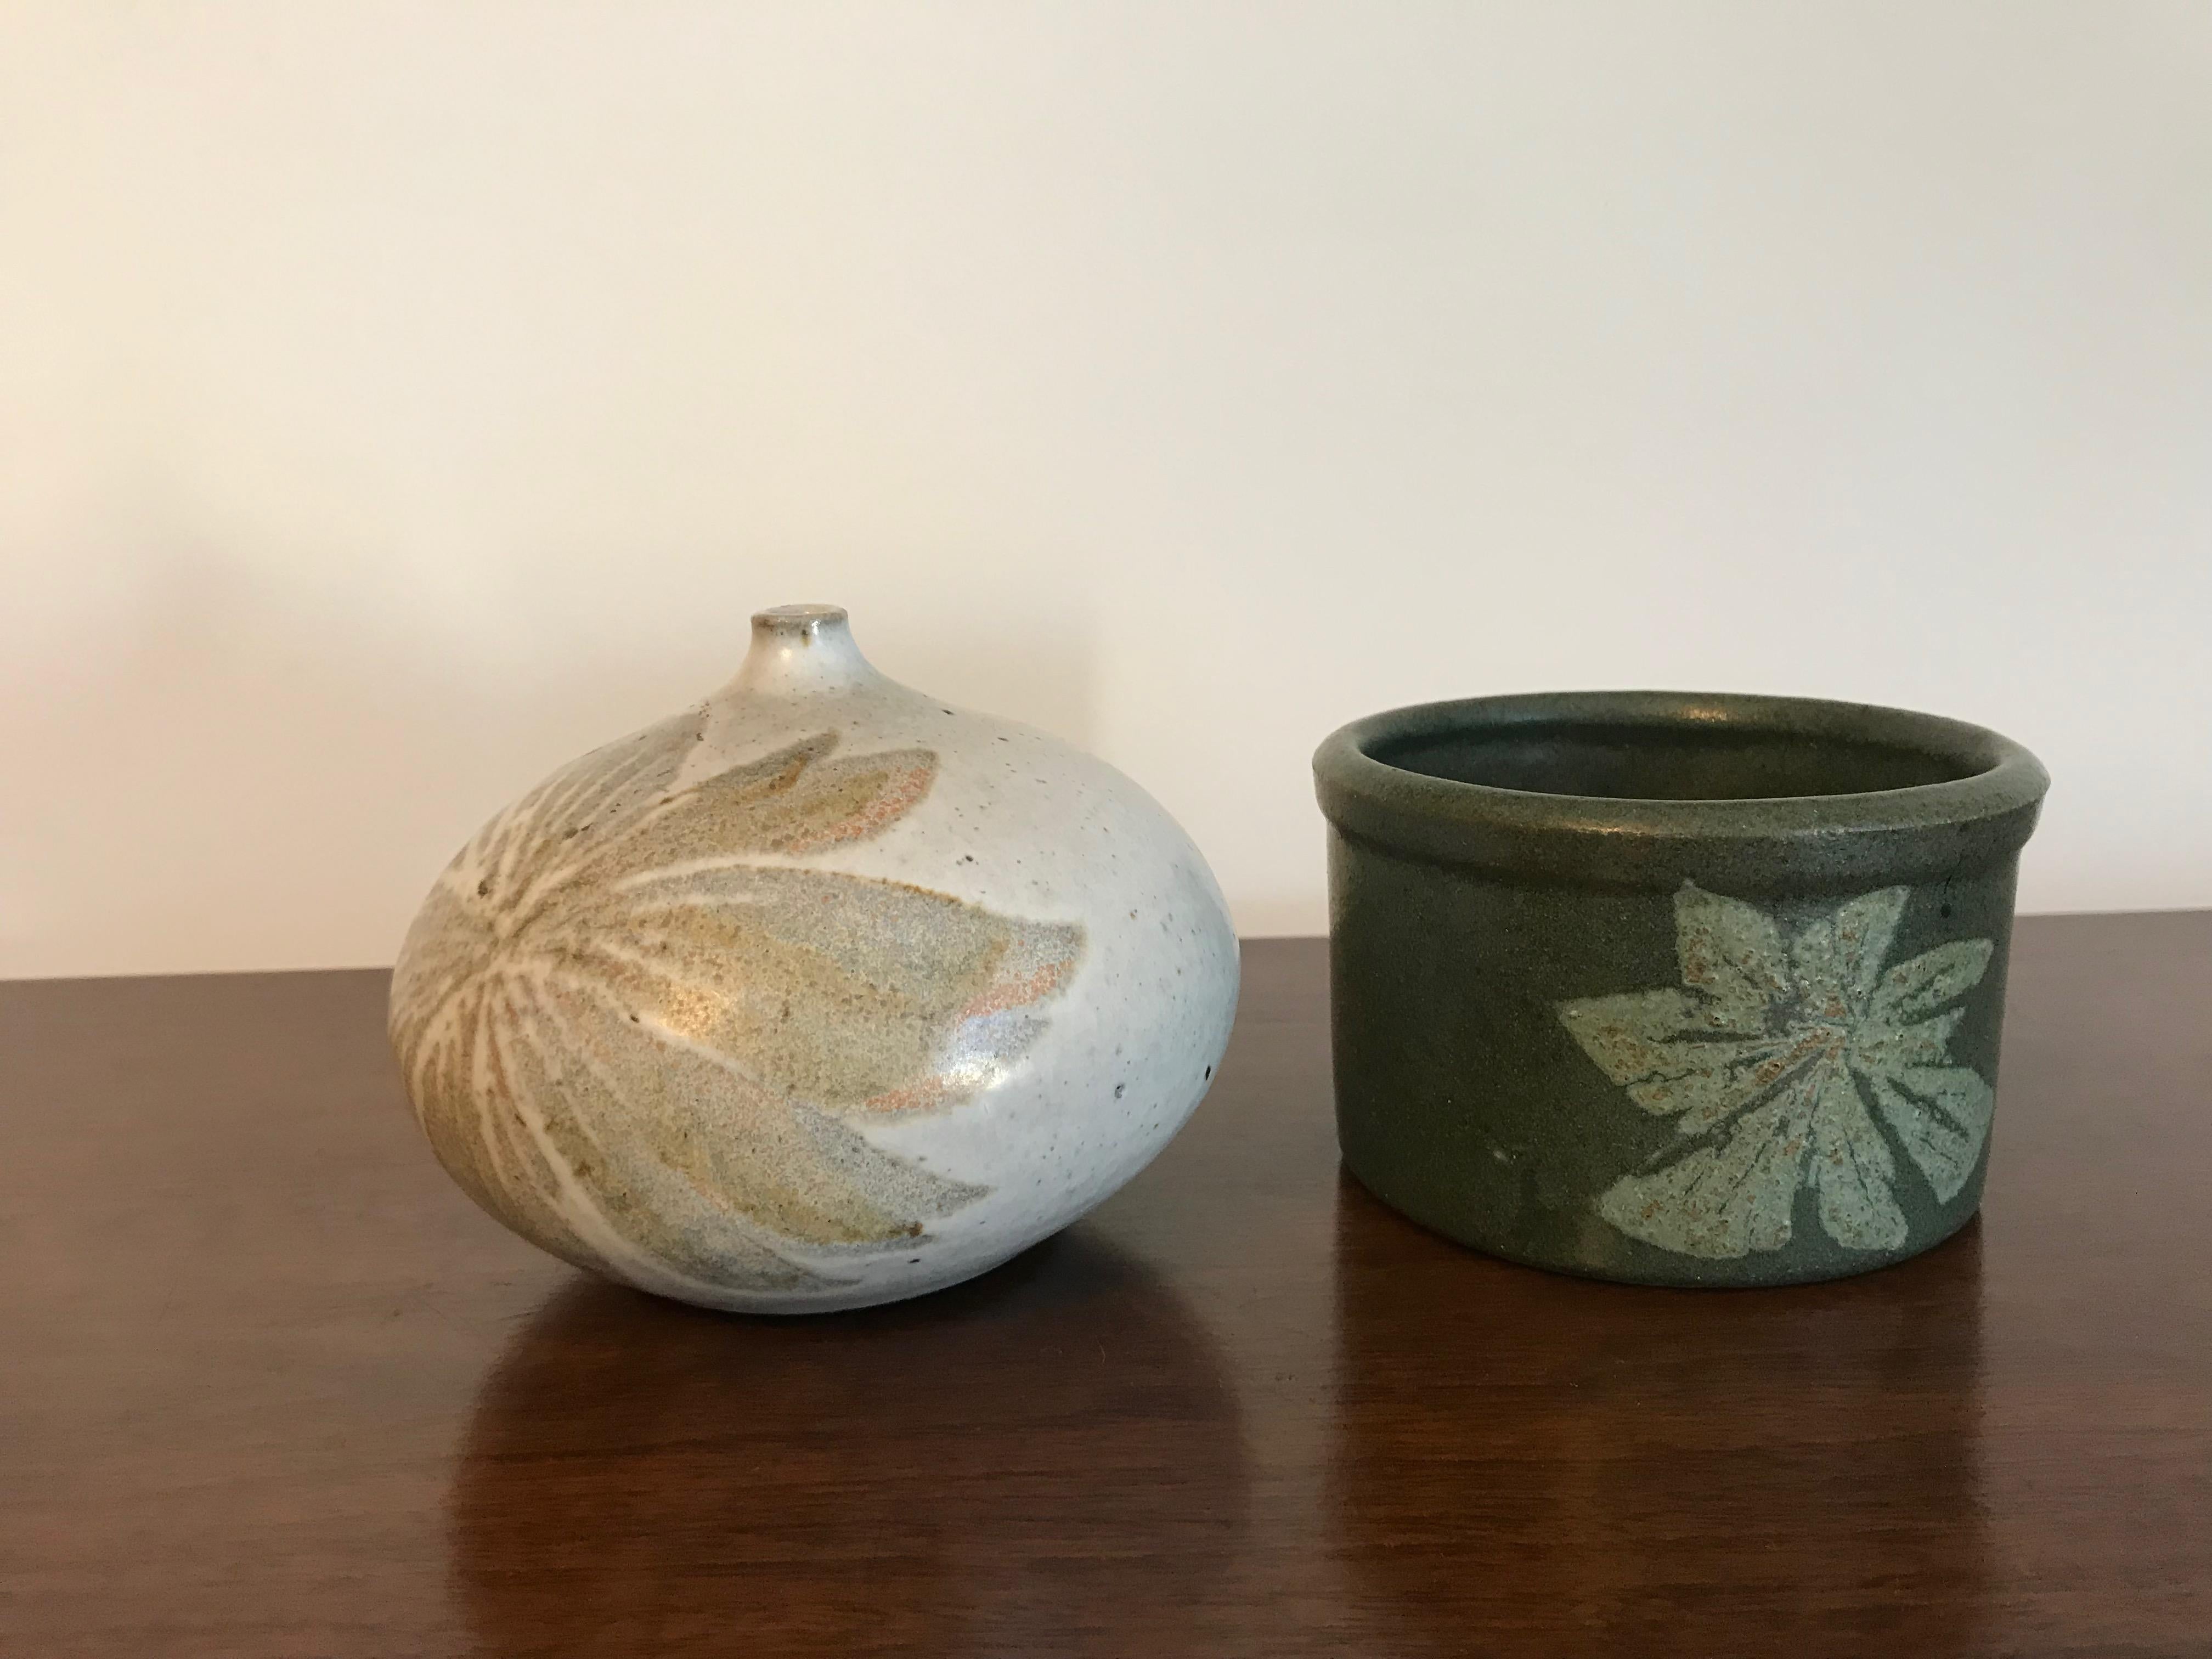 California design.
Nice weed pot vase and occasional bowl / planter (great for a dog or cat  bowl)
Wheel thrown clay, glazed with floral accent.
Display with small flowers / branches and or add to collections...

